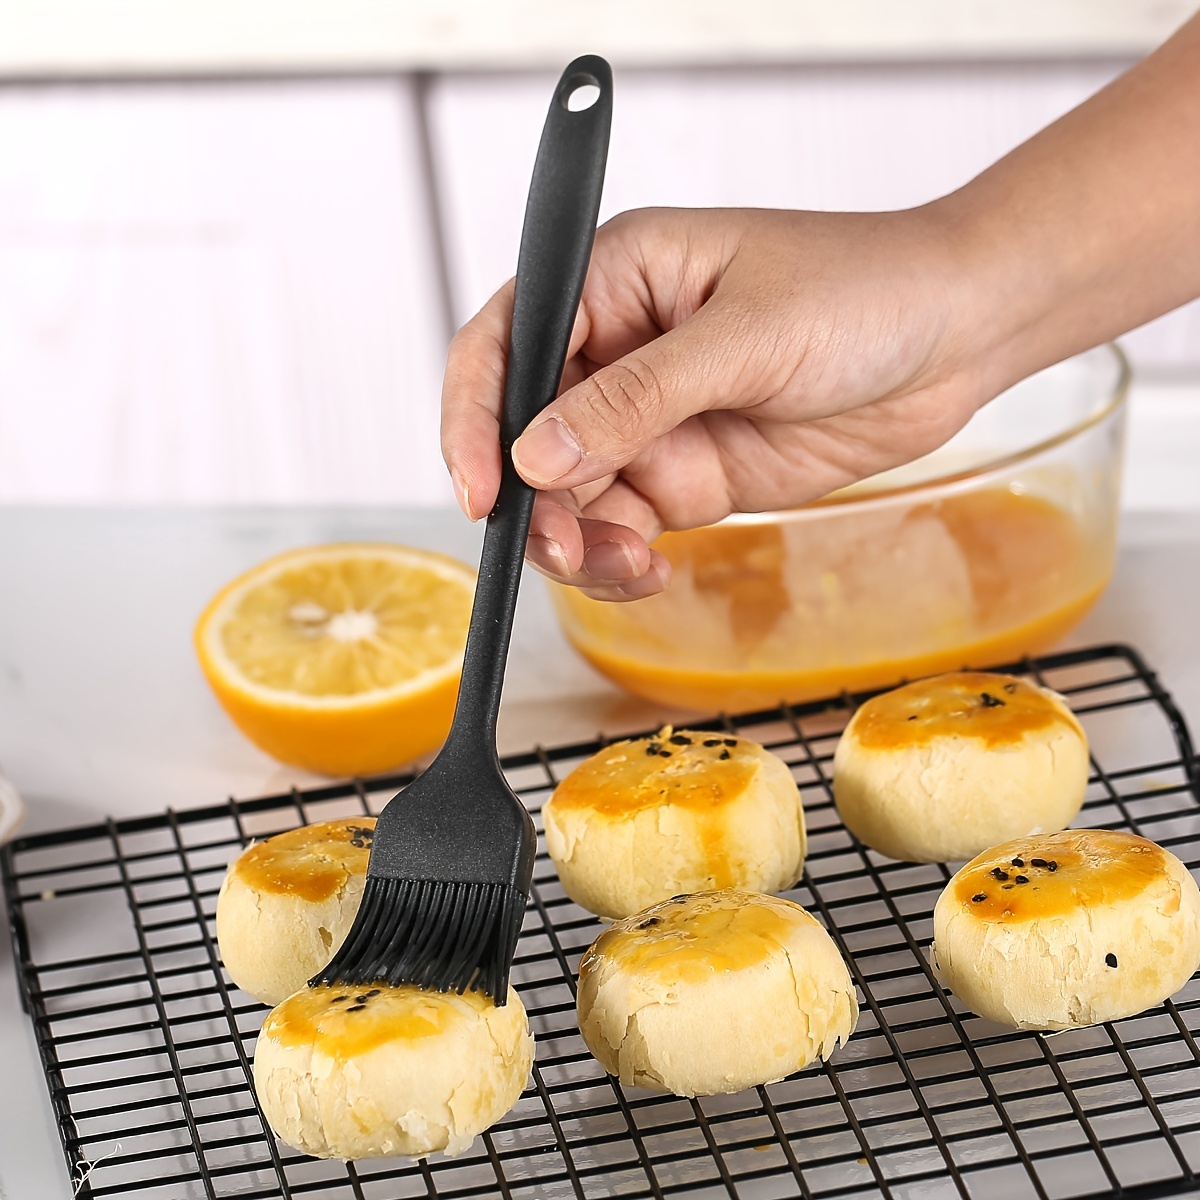 Silicone Basting Brush and Pastry Brush for BBQ, Grilling, Baking & Cooking